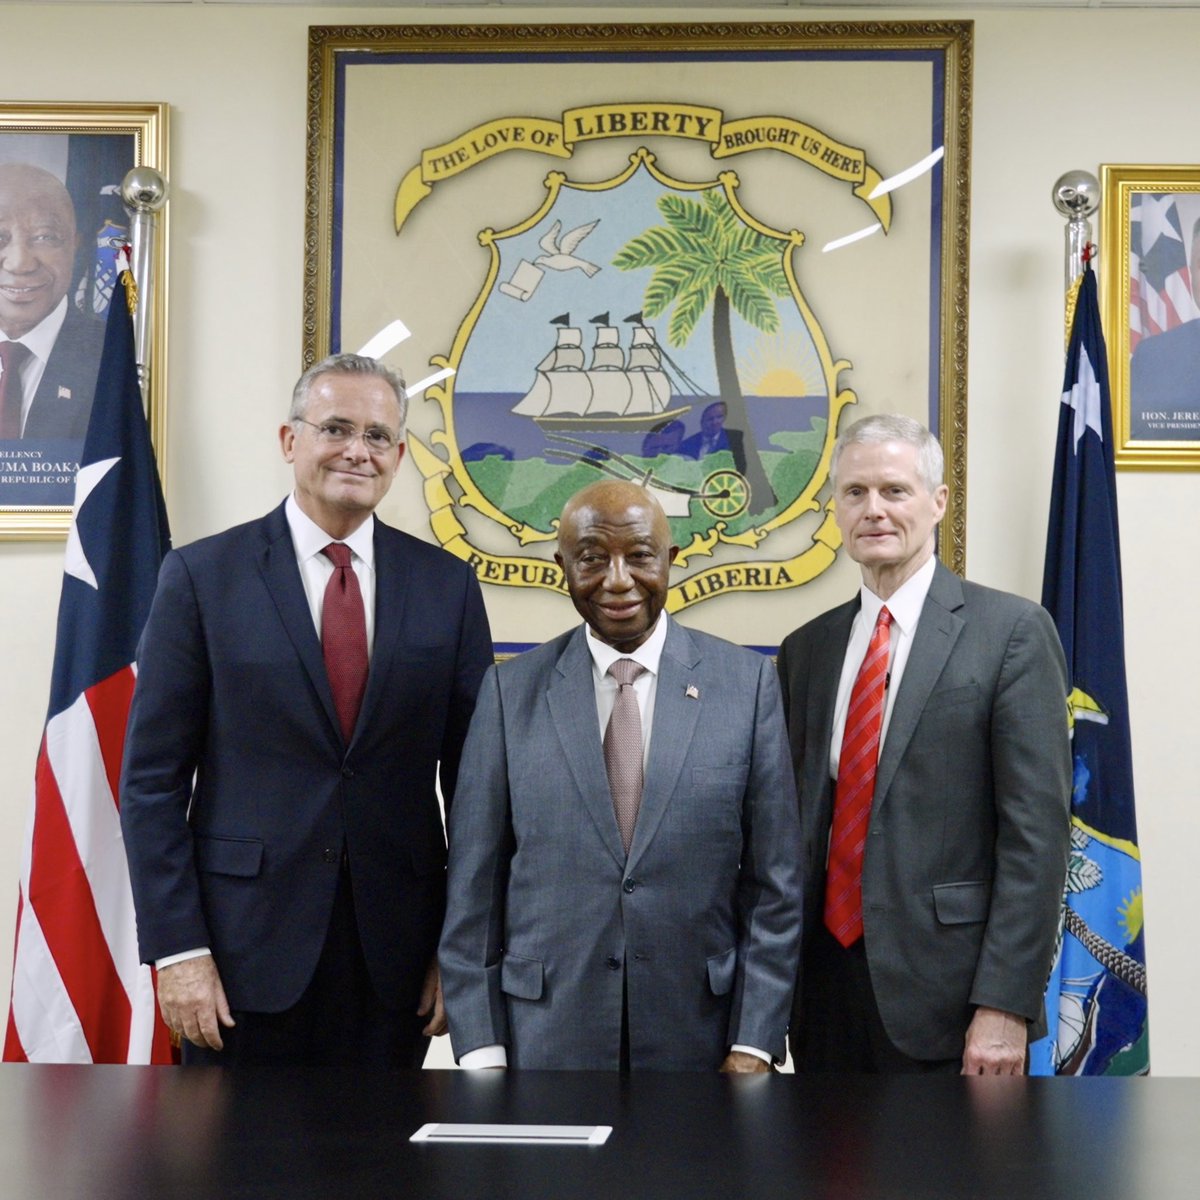 Elder @PatrickKearon and I were honored to meet today with new Liberia President Joseph Boakai in Monrovia, Liberia. We discussed education and self-reliance and how The Church of Jesus Christ of Latter-day Saints can continue to assist with these efforts. We are grateful for our